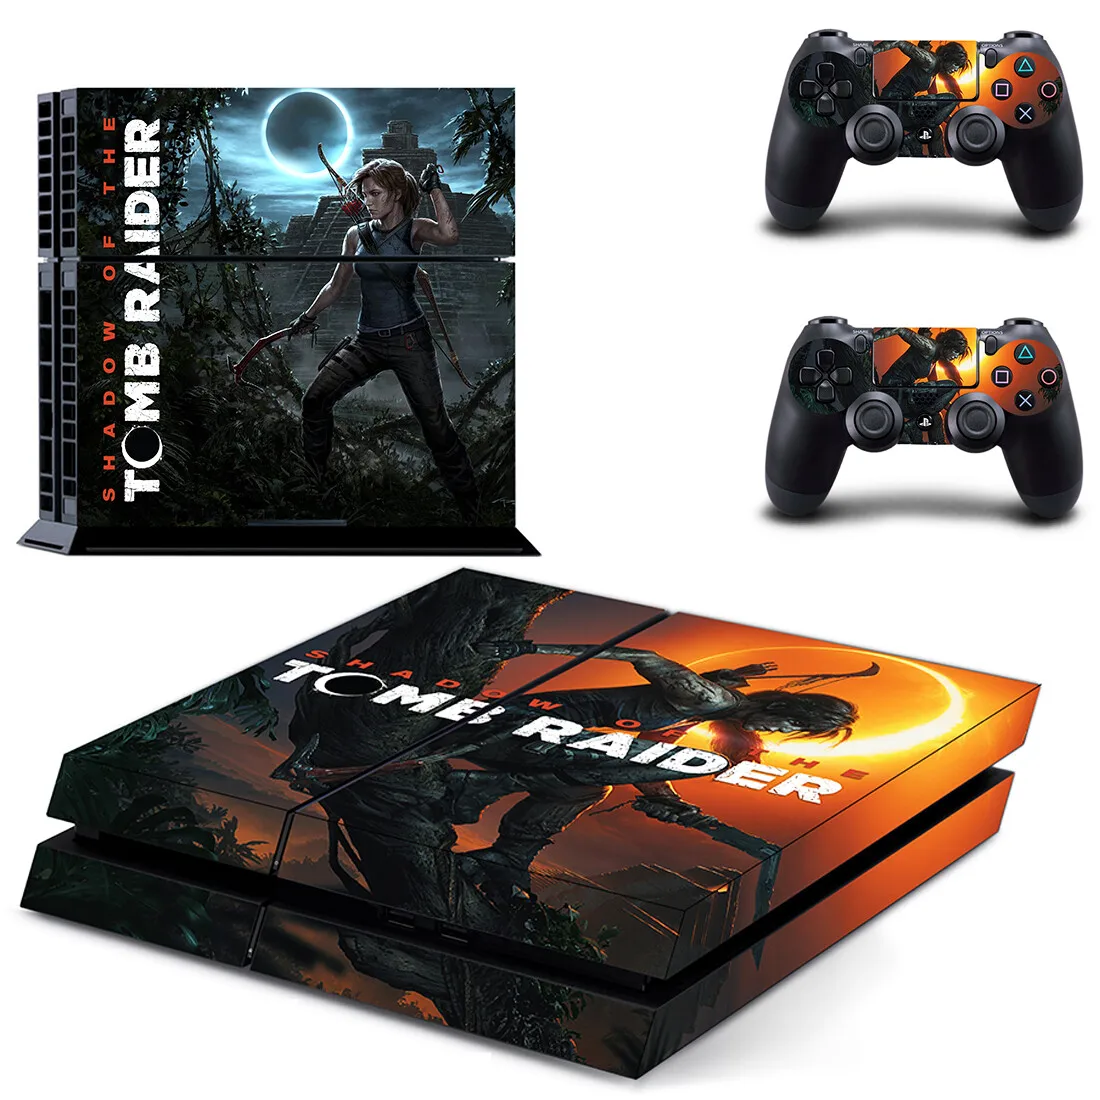 Tomb Raider PS4 Stickers Play station 4 Skin Sticker Decals For PlayStation 4 PS4 Console & Controller Skins Vinyl